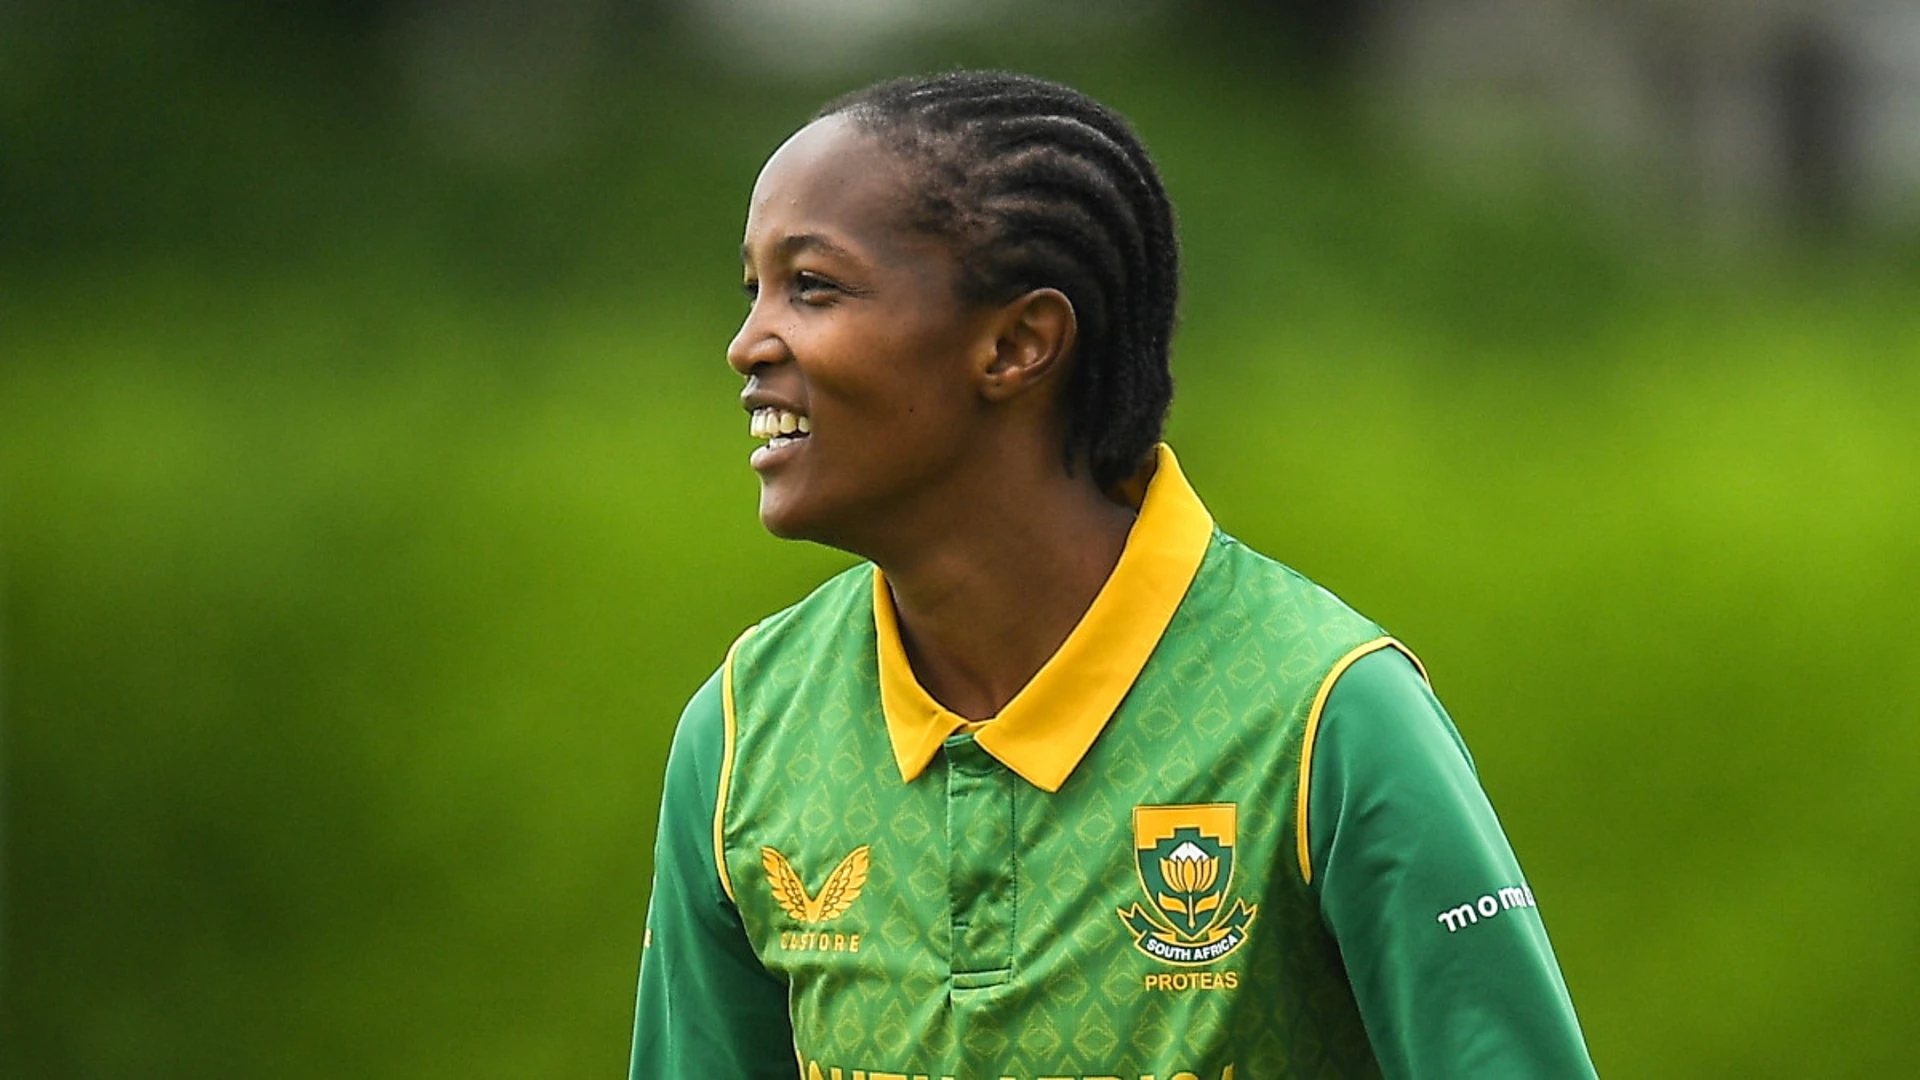 Khaka welcomes the challenge of leading Proteas women bowling attack